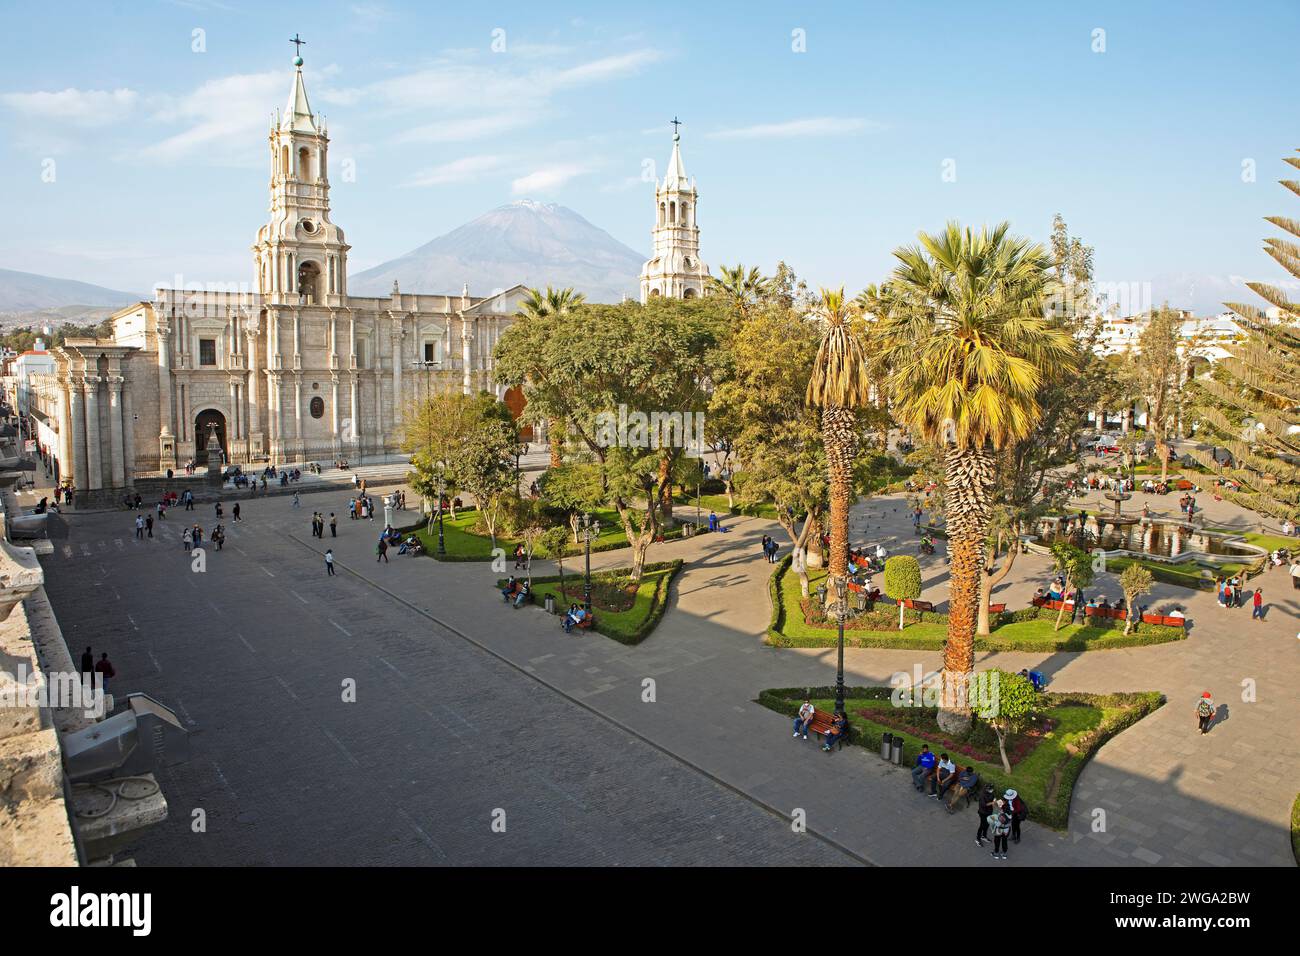 Cathedral of Arequipa or Cathedral Basilica of Santa Maria at the Plaza Principal, behind the volcano Misti, Arequipa, Province Arequipa, Peru Stock Photo